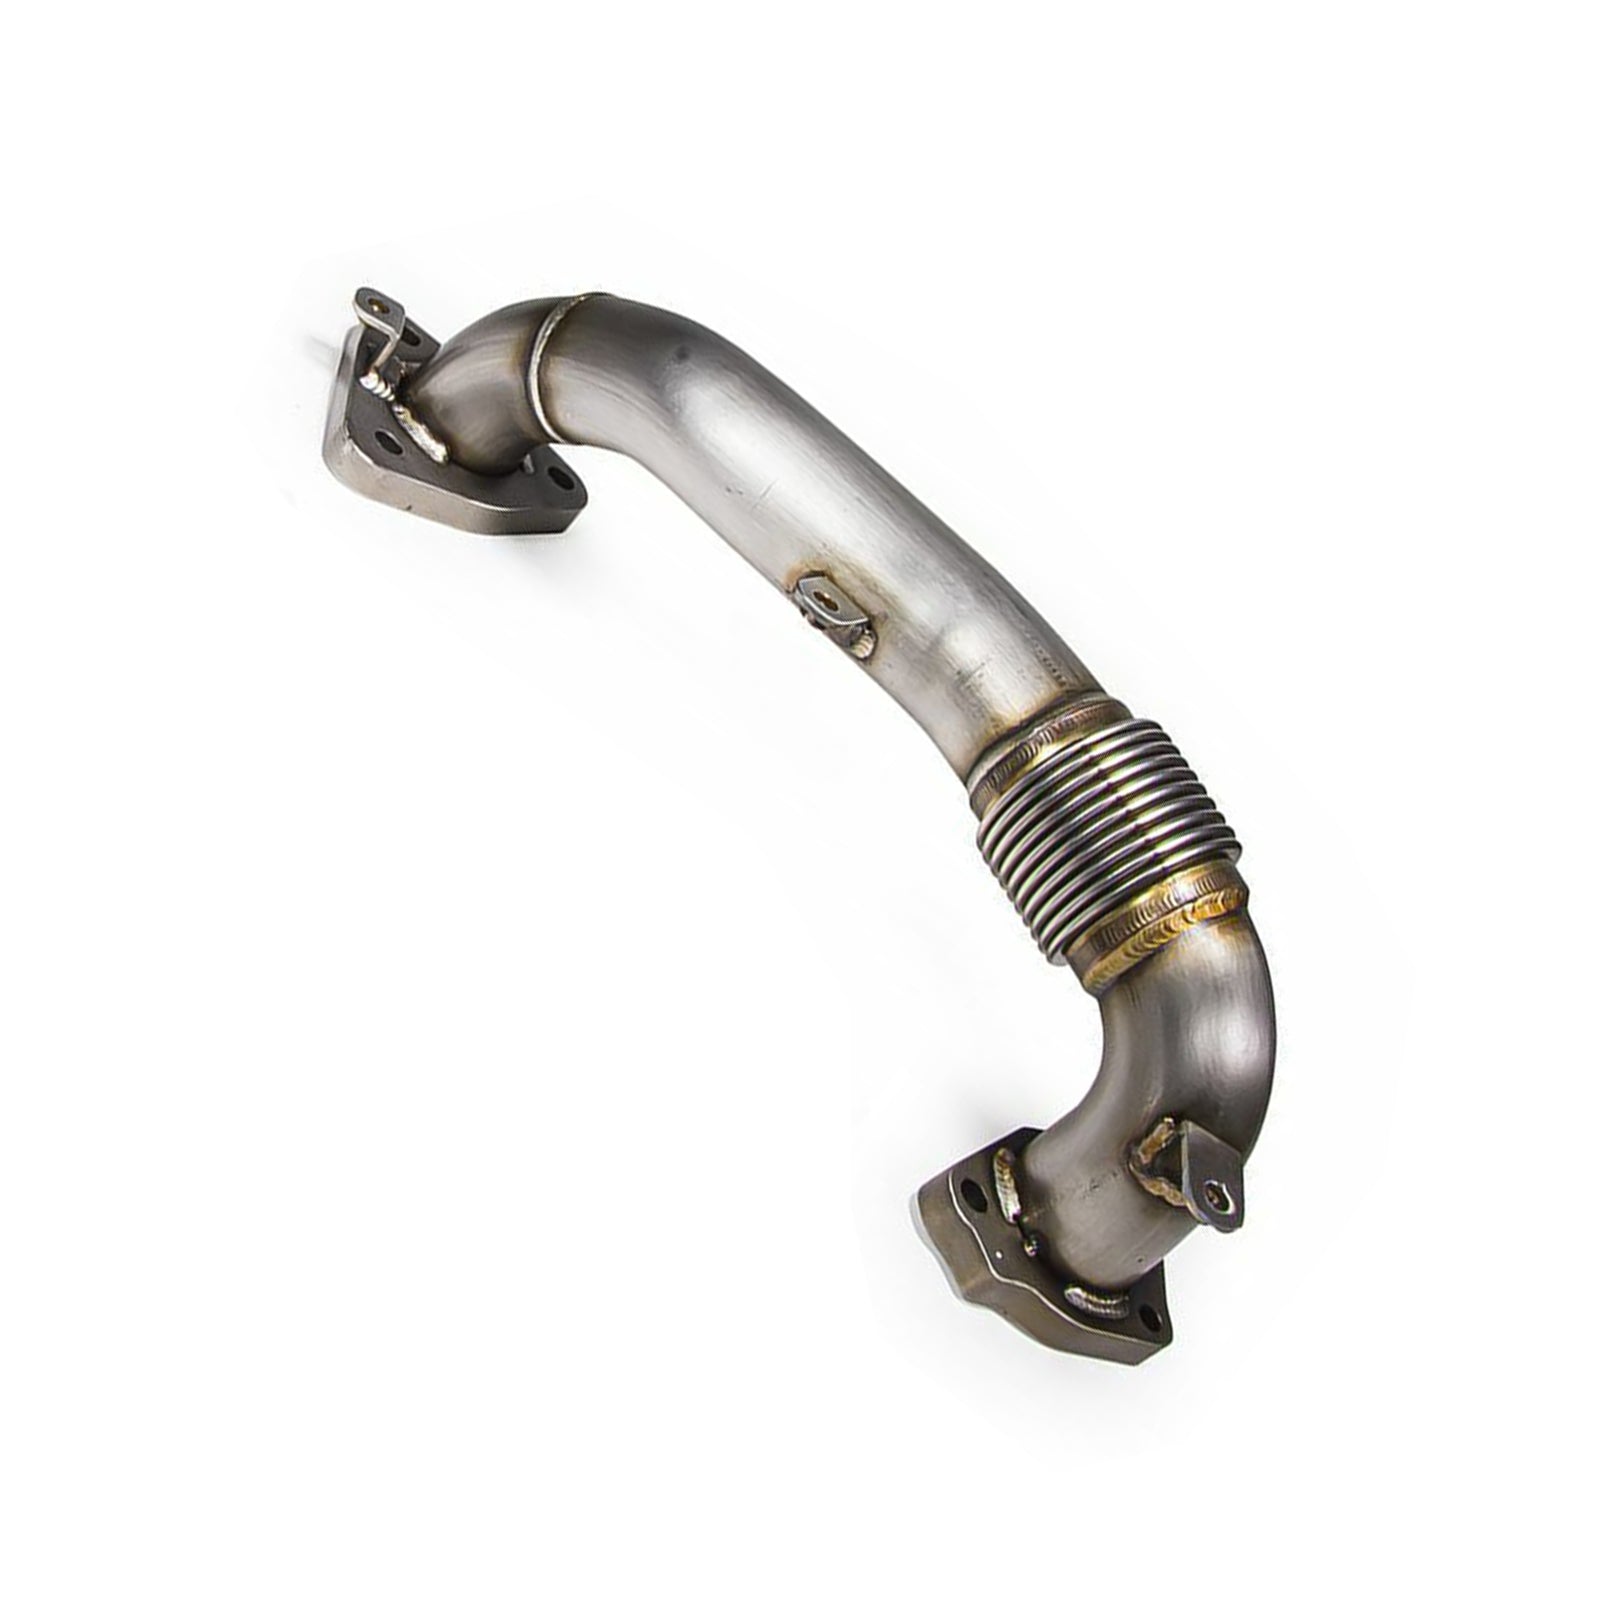 Chevy 2017-2020 6.6L L5P Duramax Diesel 3.5" High Flow Exhaust Up Pipes